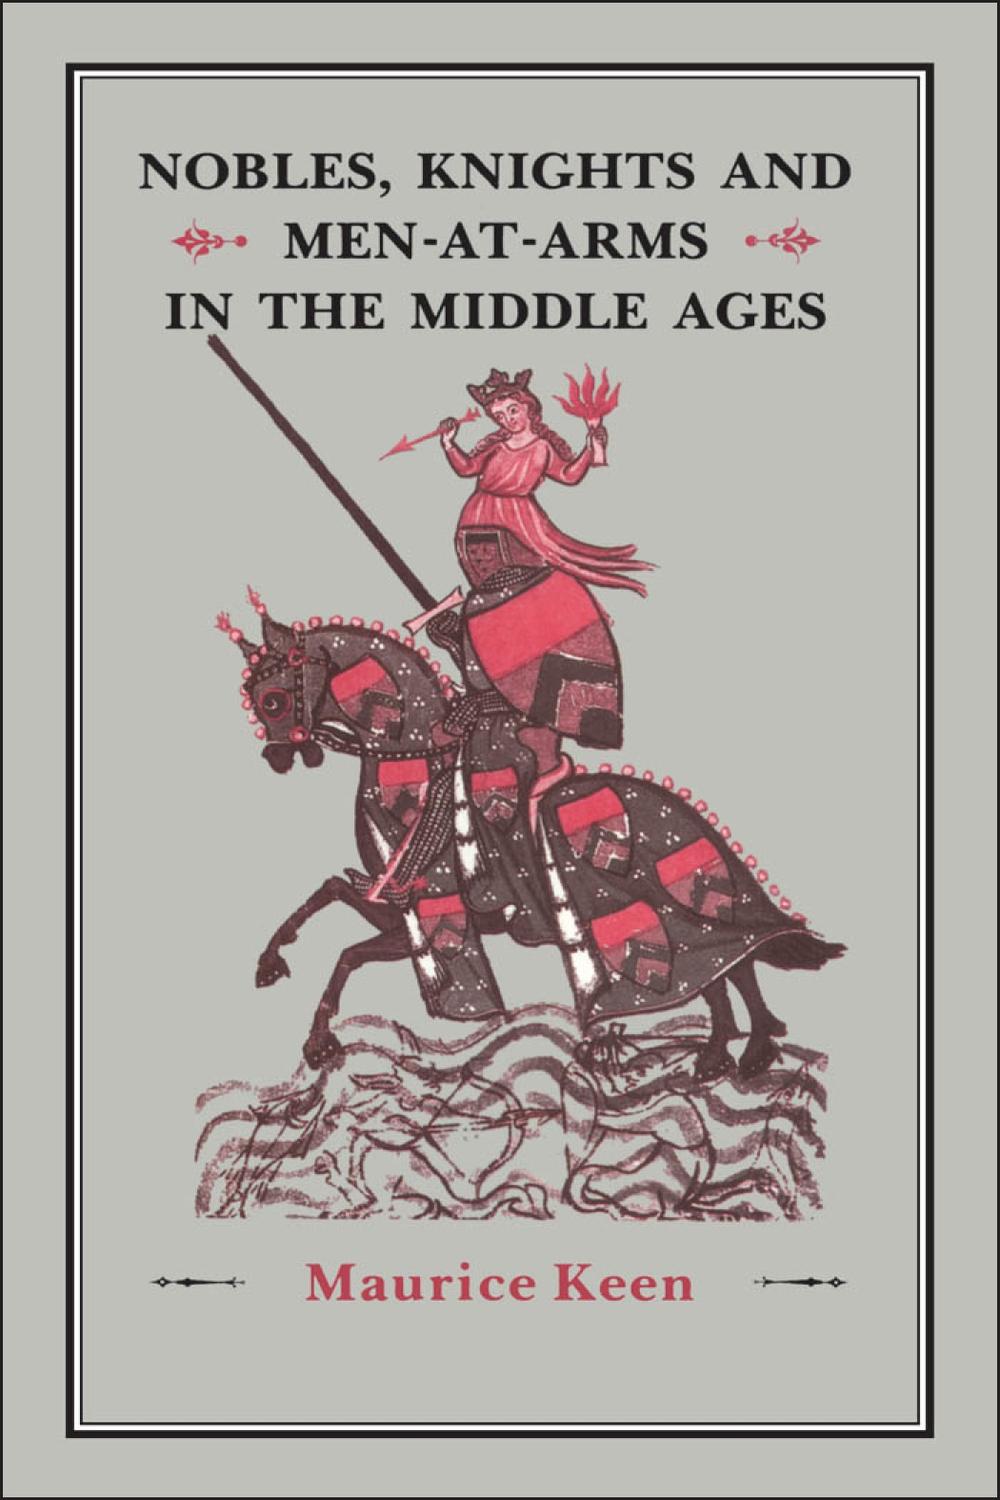 Nobles, Knights and Men-at-Arms  in the Middle Ages - Maurice Keen